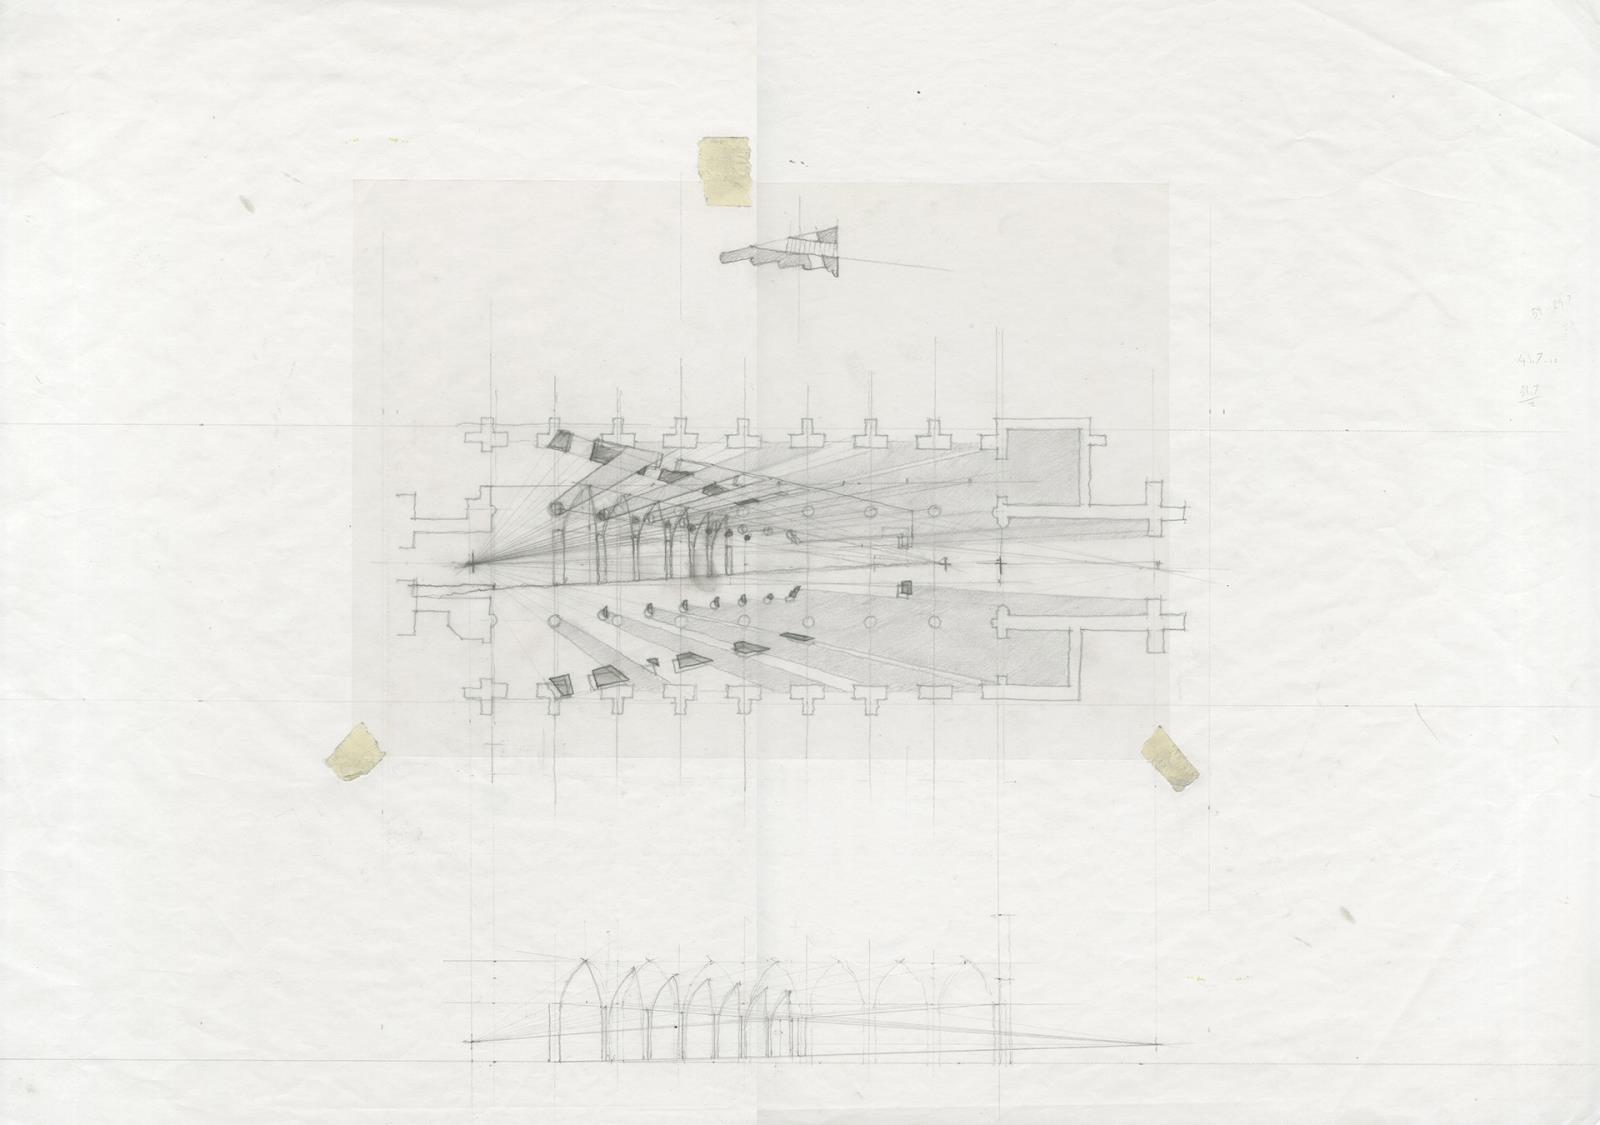 Presidents Medals: The Space Between Drawing and Building: Architecture ...